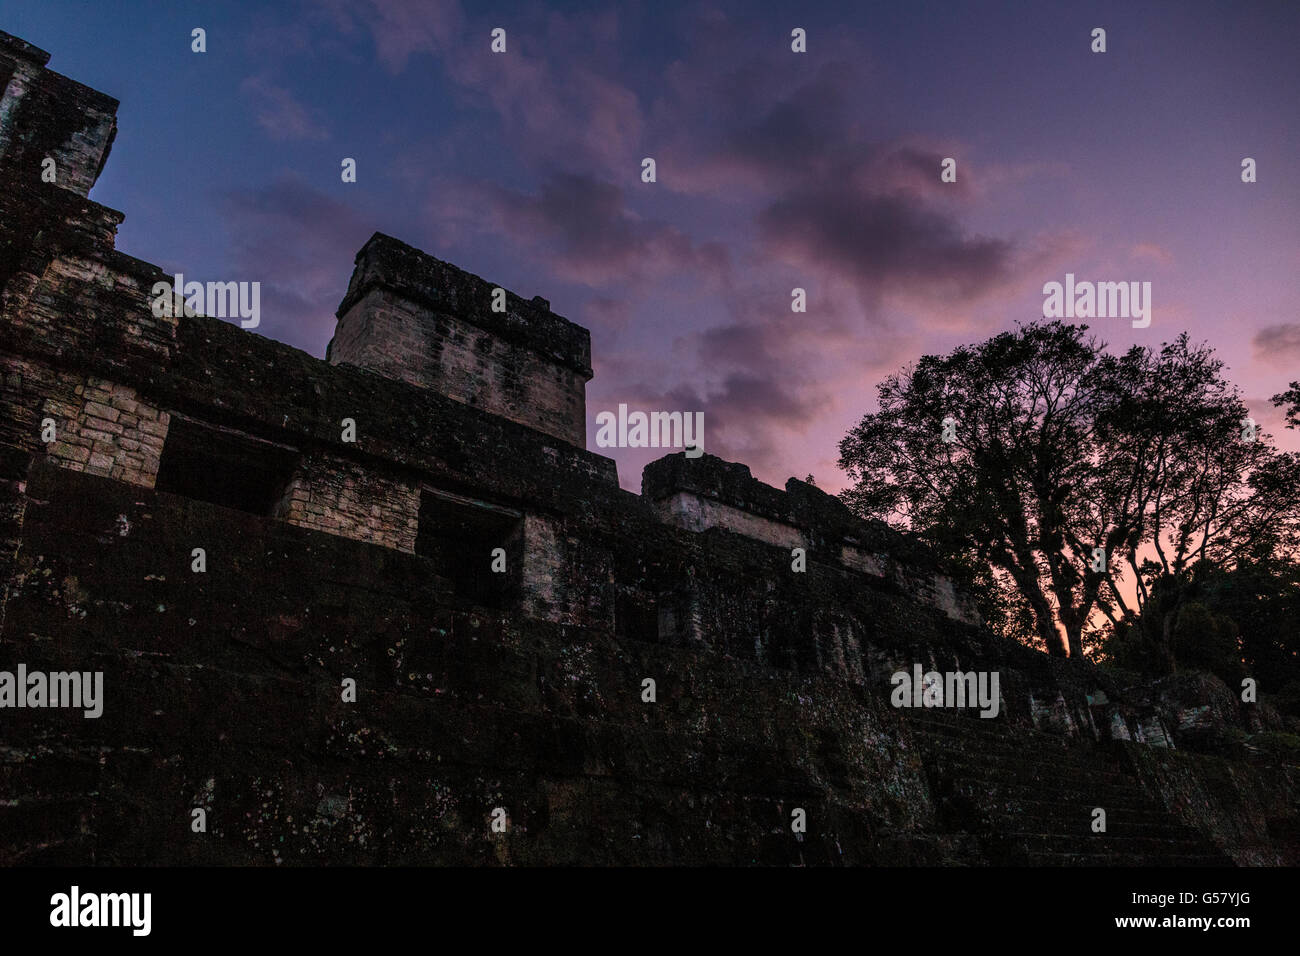 Dusk falls over Maler's Palace in the ancient Mayan ruins of Tikal, on the south side of the Great Plaza in northern Guatemala. Stock Photo